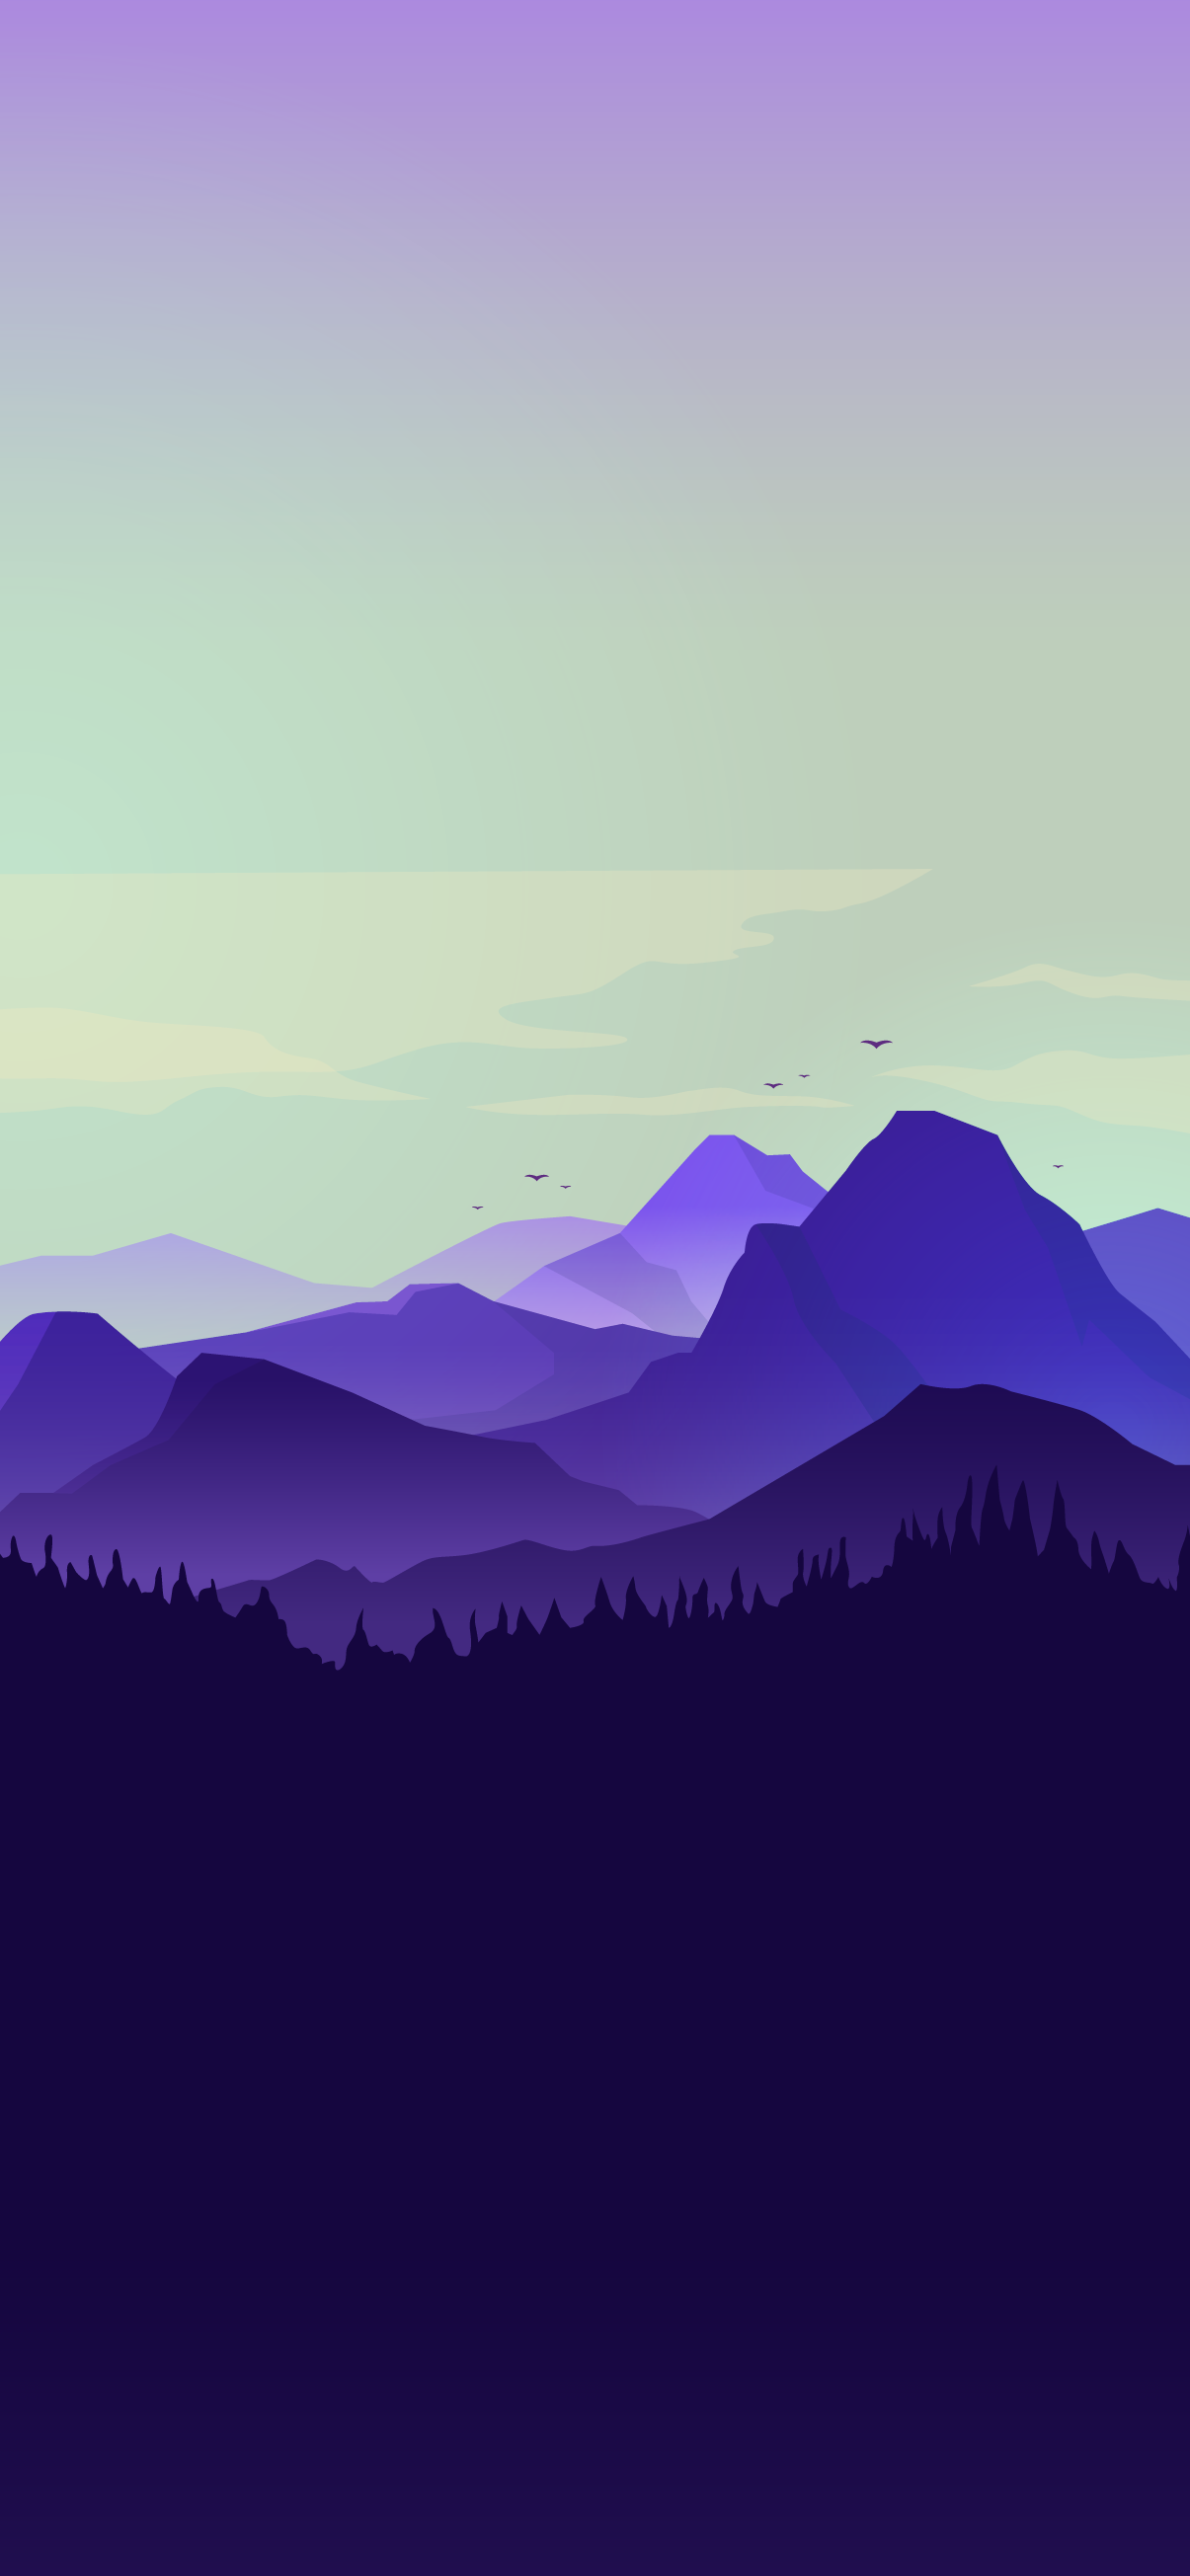 Mountain Sunset Hd 2021 Wallpapers